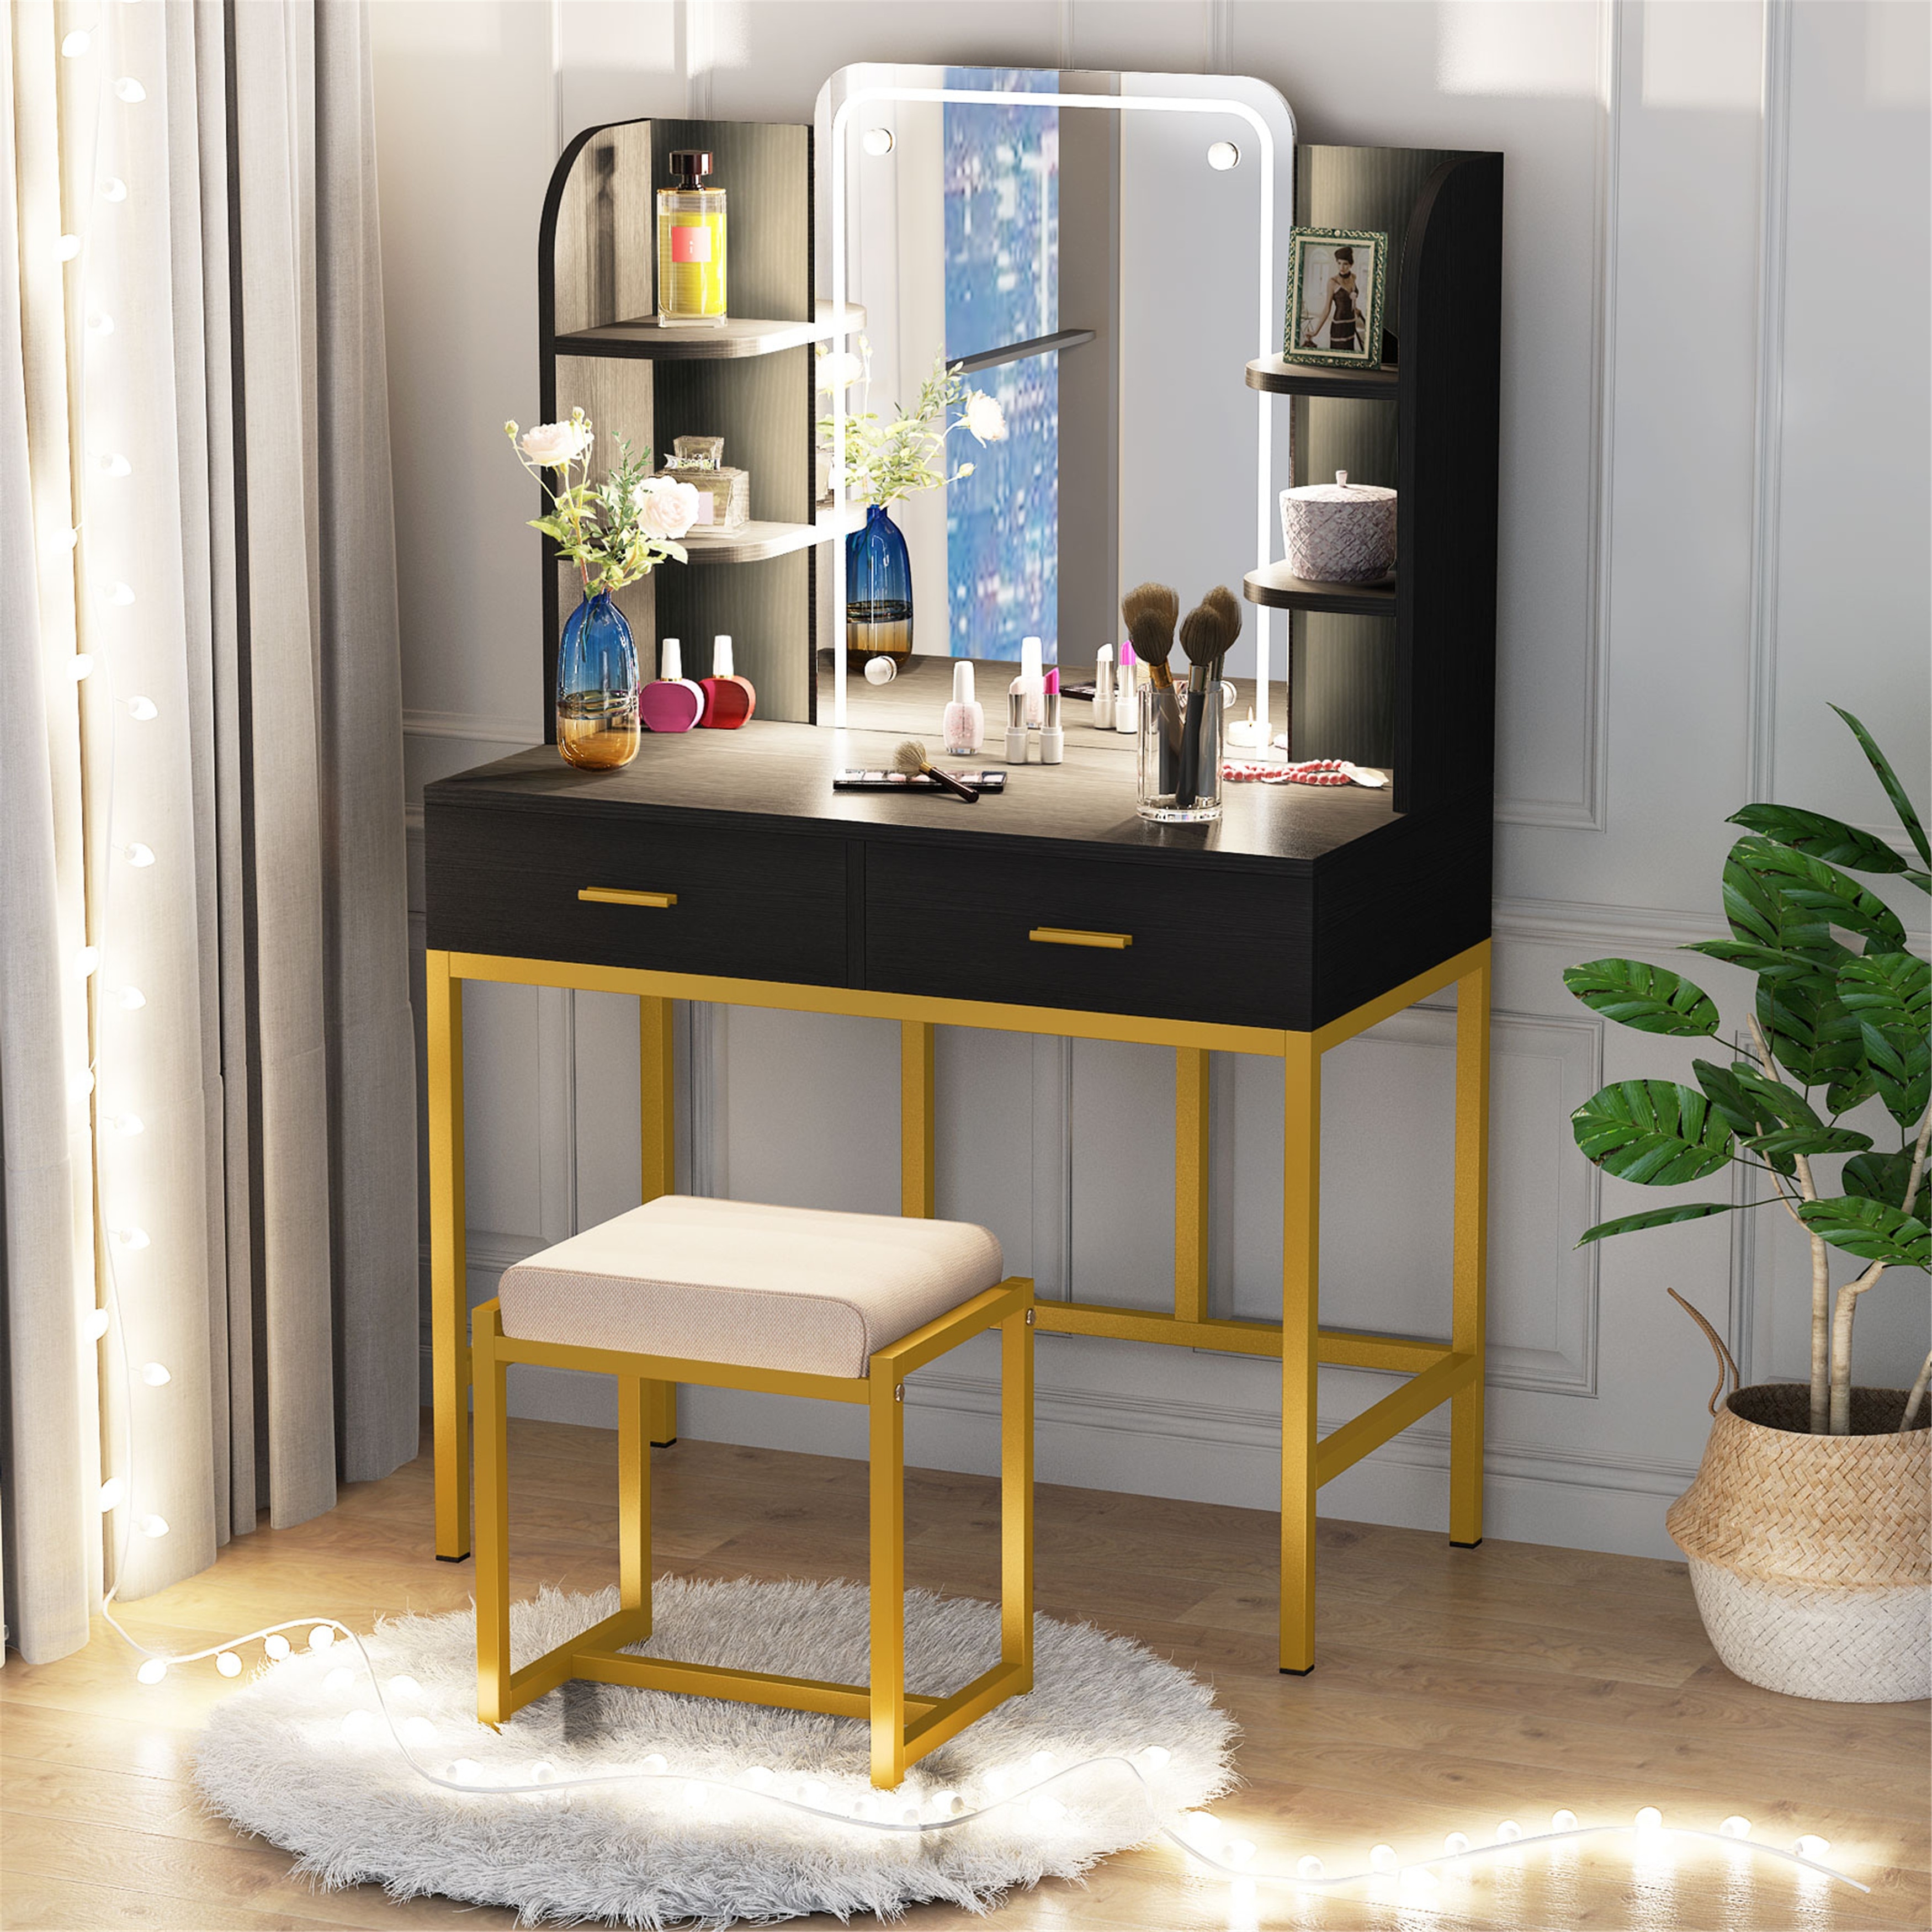 https://ak1.ostkcdn.com/images/products/is/images/direct/5af3196e6df3e3423f1b745ecc36d53fed5ffa66/Vanity-Set-with-Lighted-Mirror-and-Cushioned-Stool%2C-Storage-Shelves-and-2-Drawers.jpg